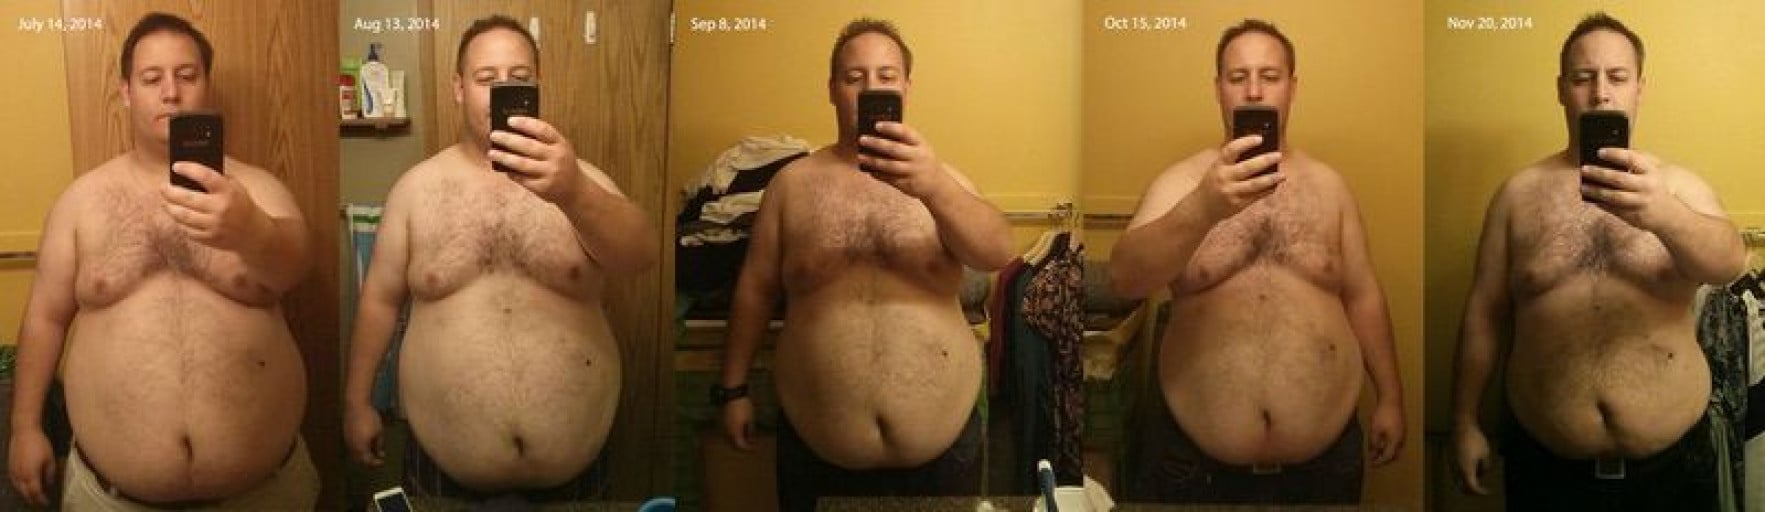 A before and after photo of a 5'7" male showing a weight reduction from 310 pounds to 264 pounds. A net loss of 46 pounds.